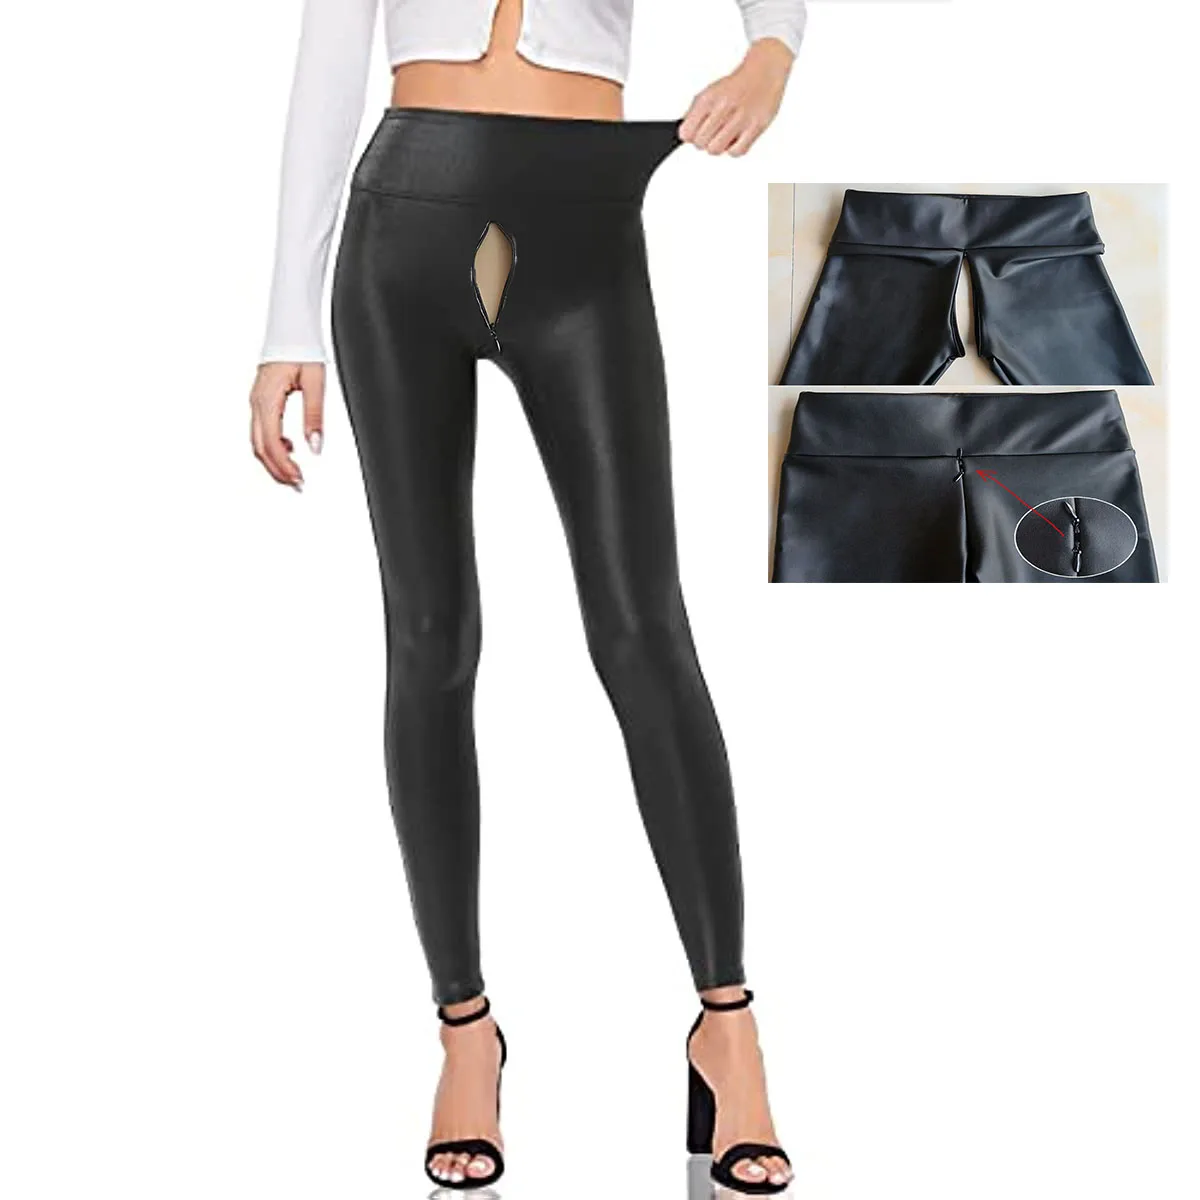 Sexy Invisible Open-crotch Pants Outdoor Sex Stretch Faux Leather Leggings Tummy Control High Waist Leather Leggings for Women